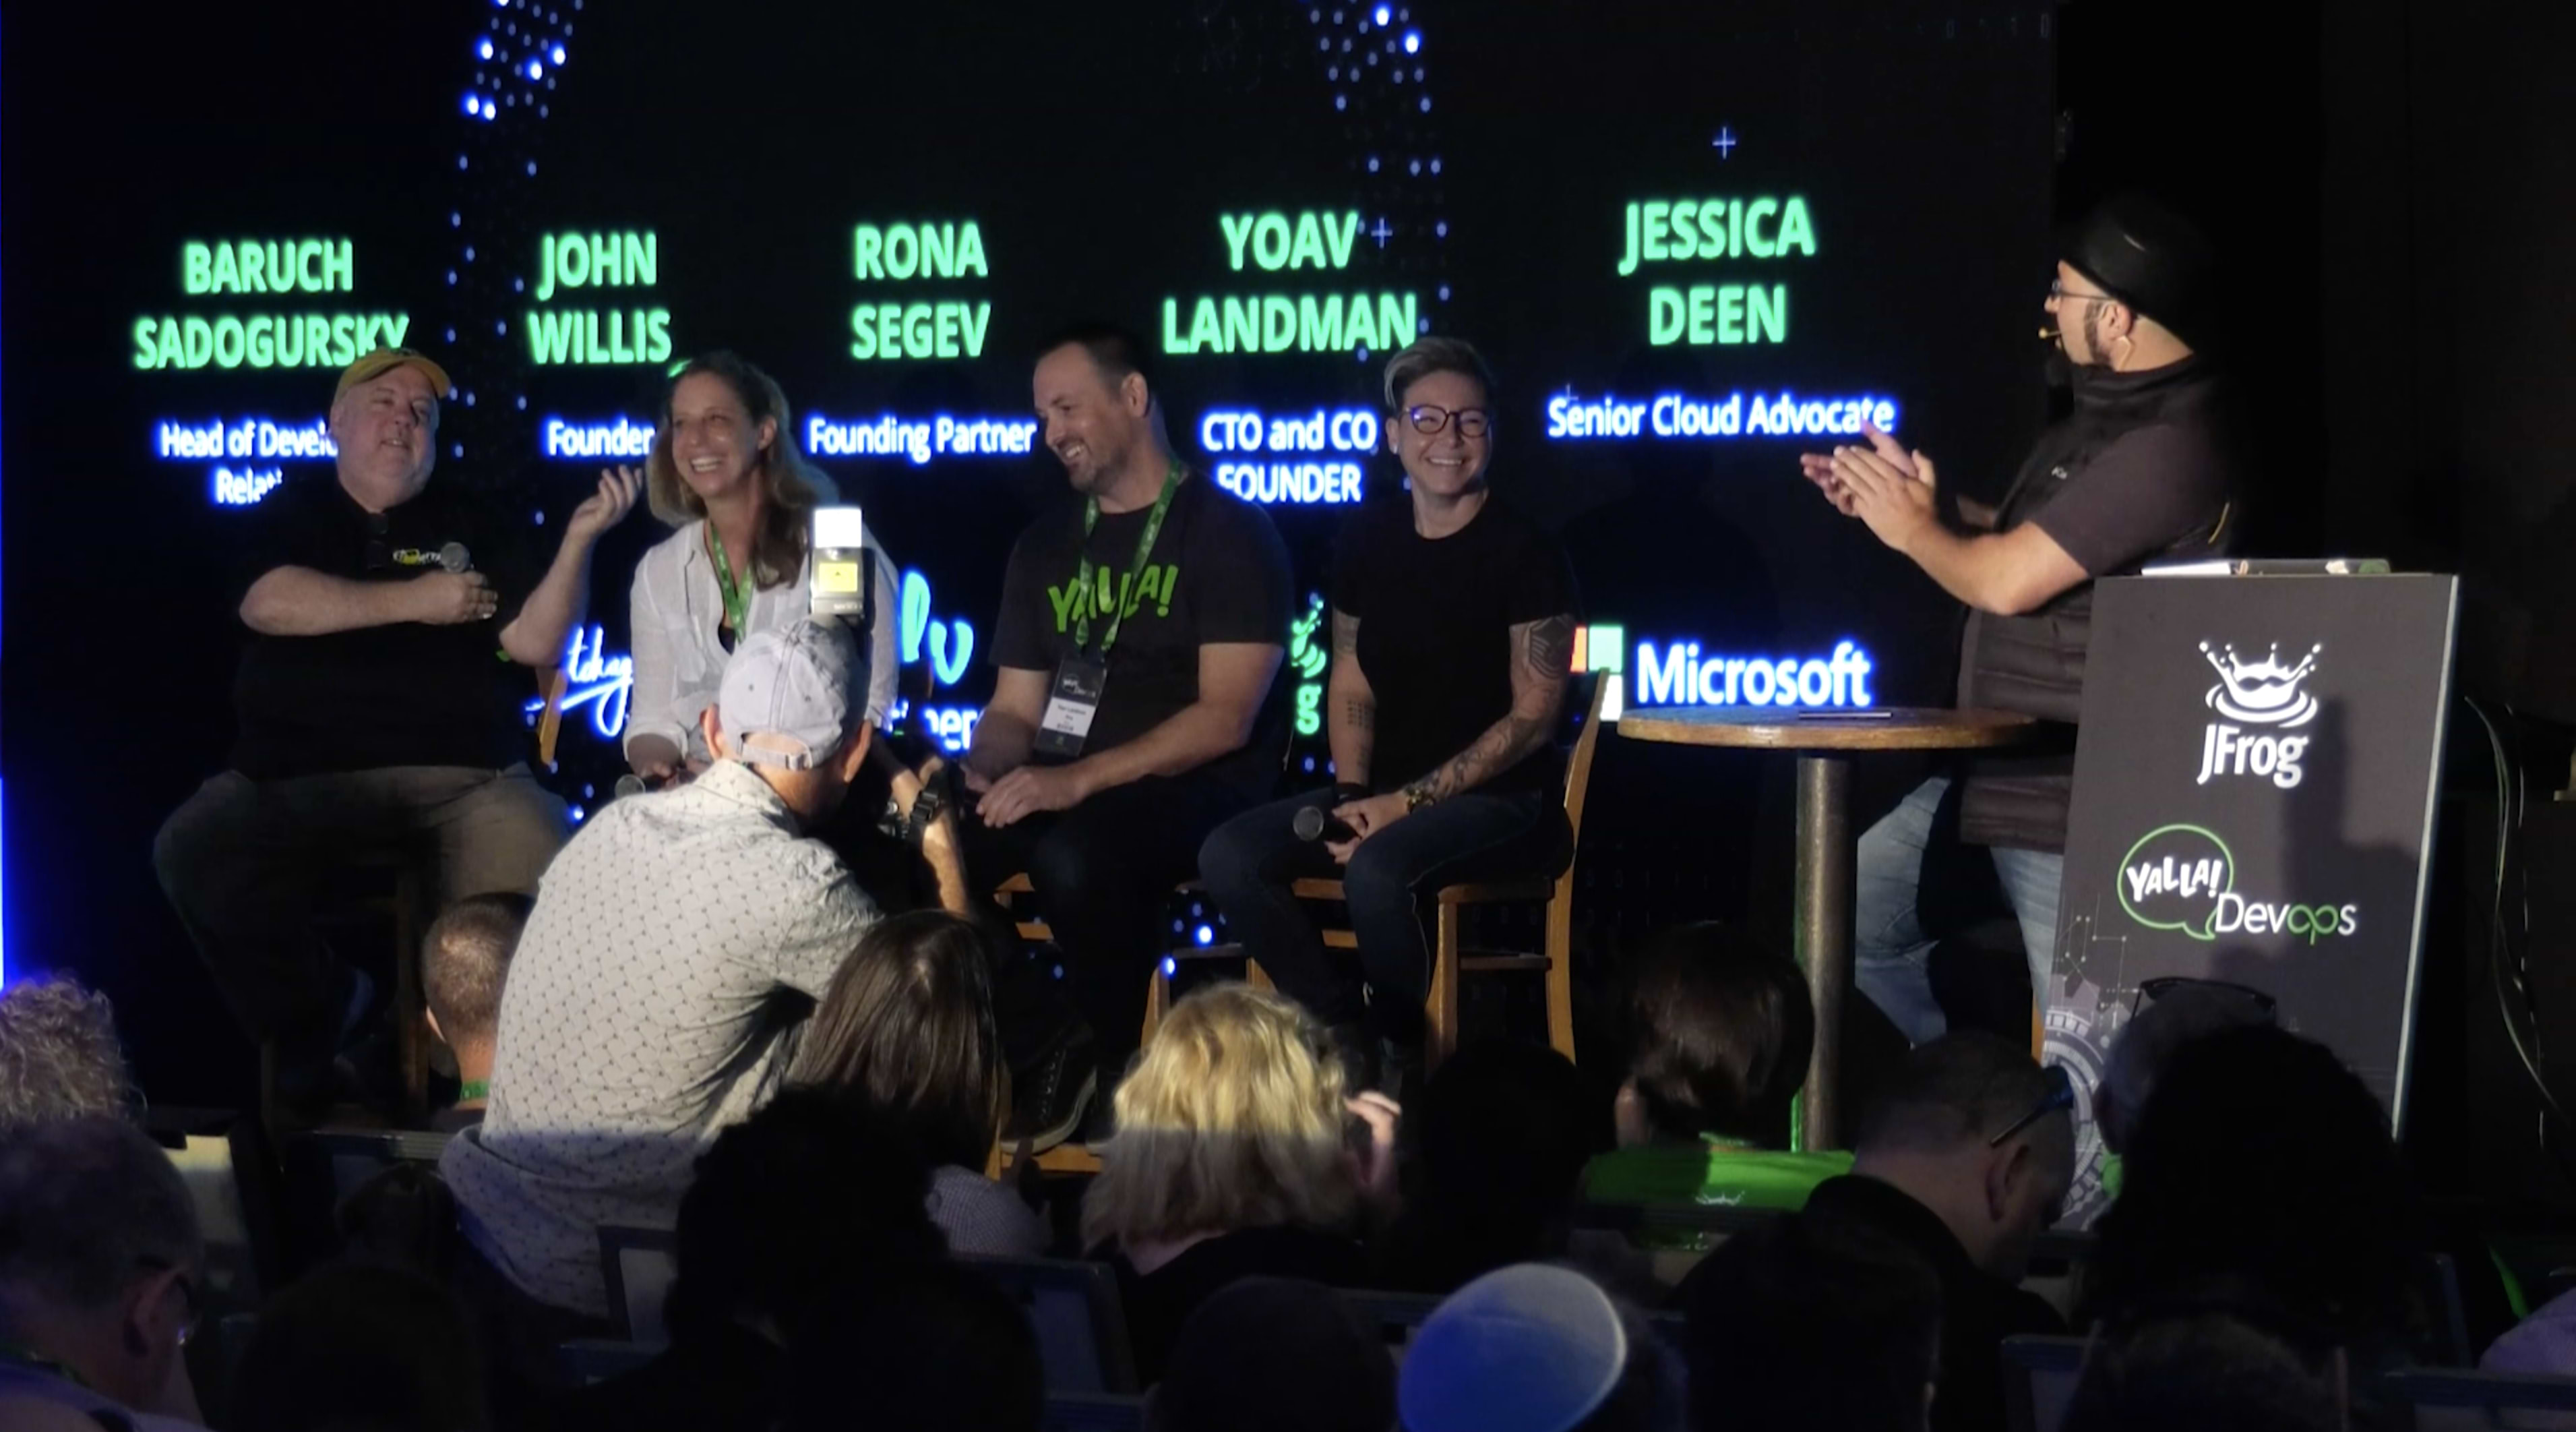 Expert Panel Discussion at Yalla DevOps 2019